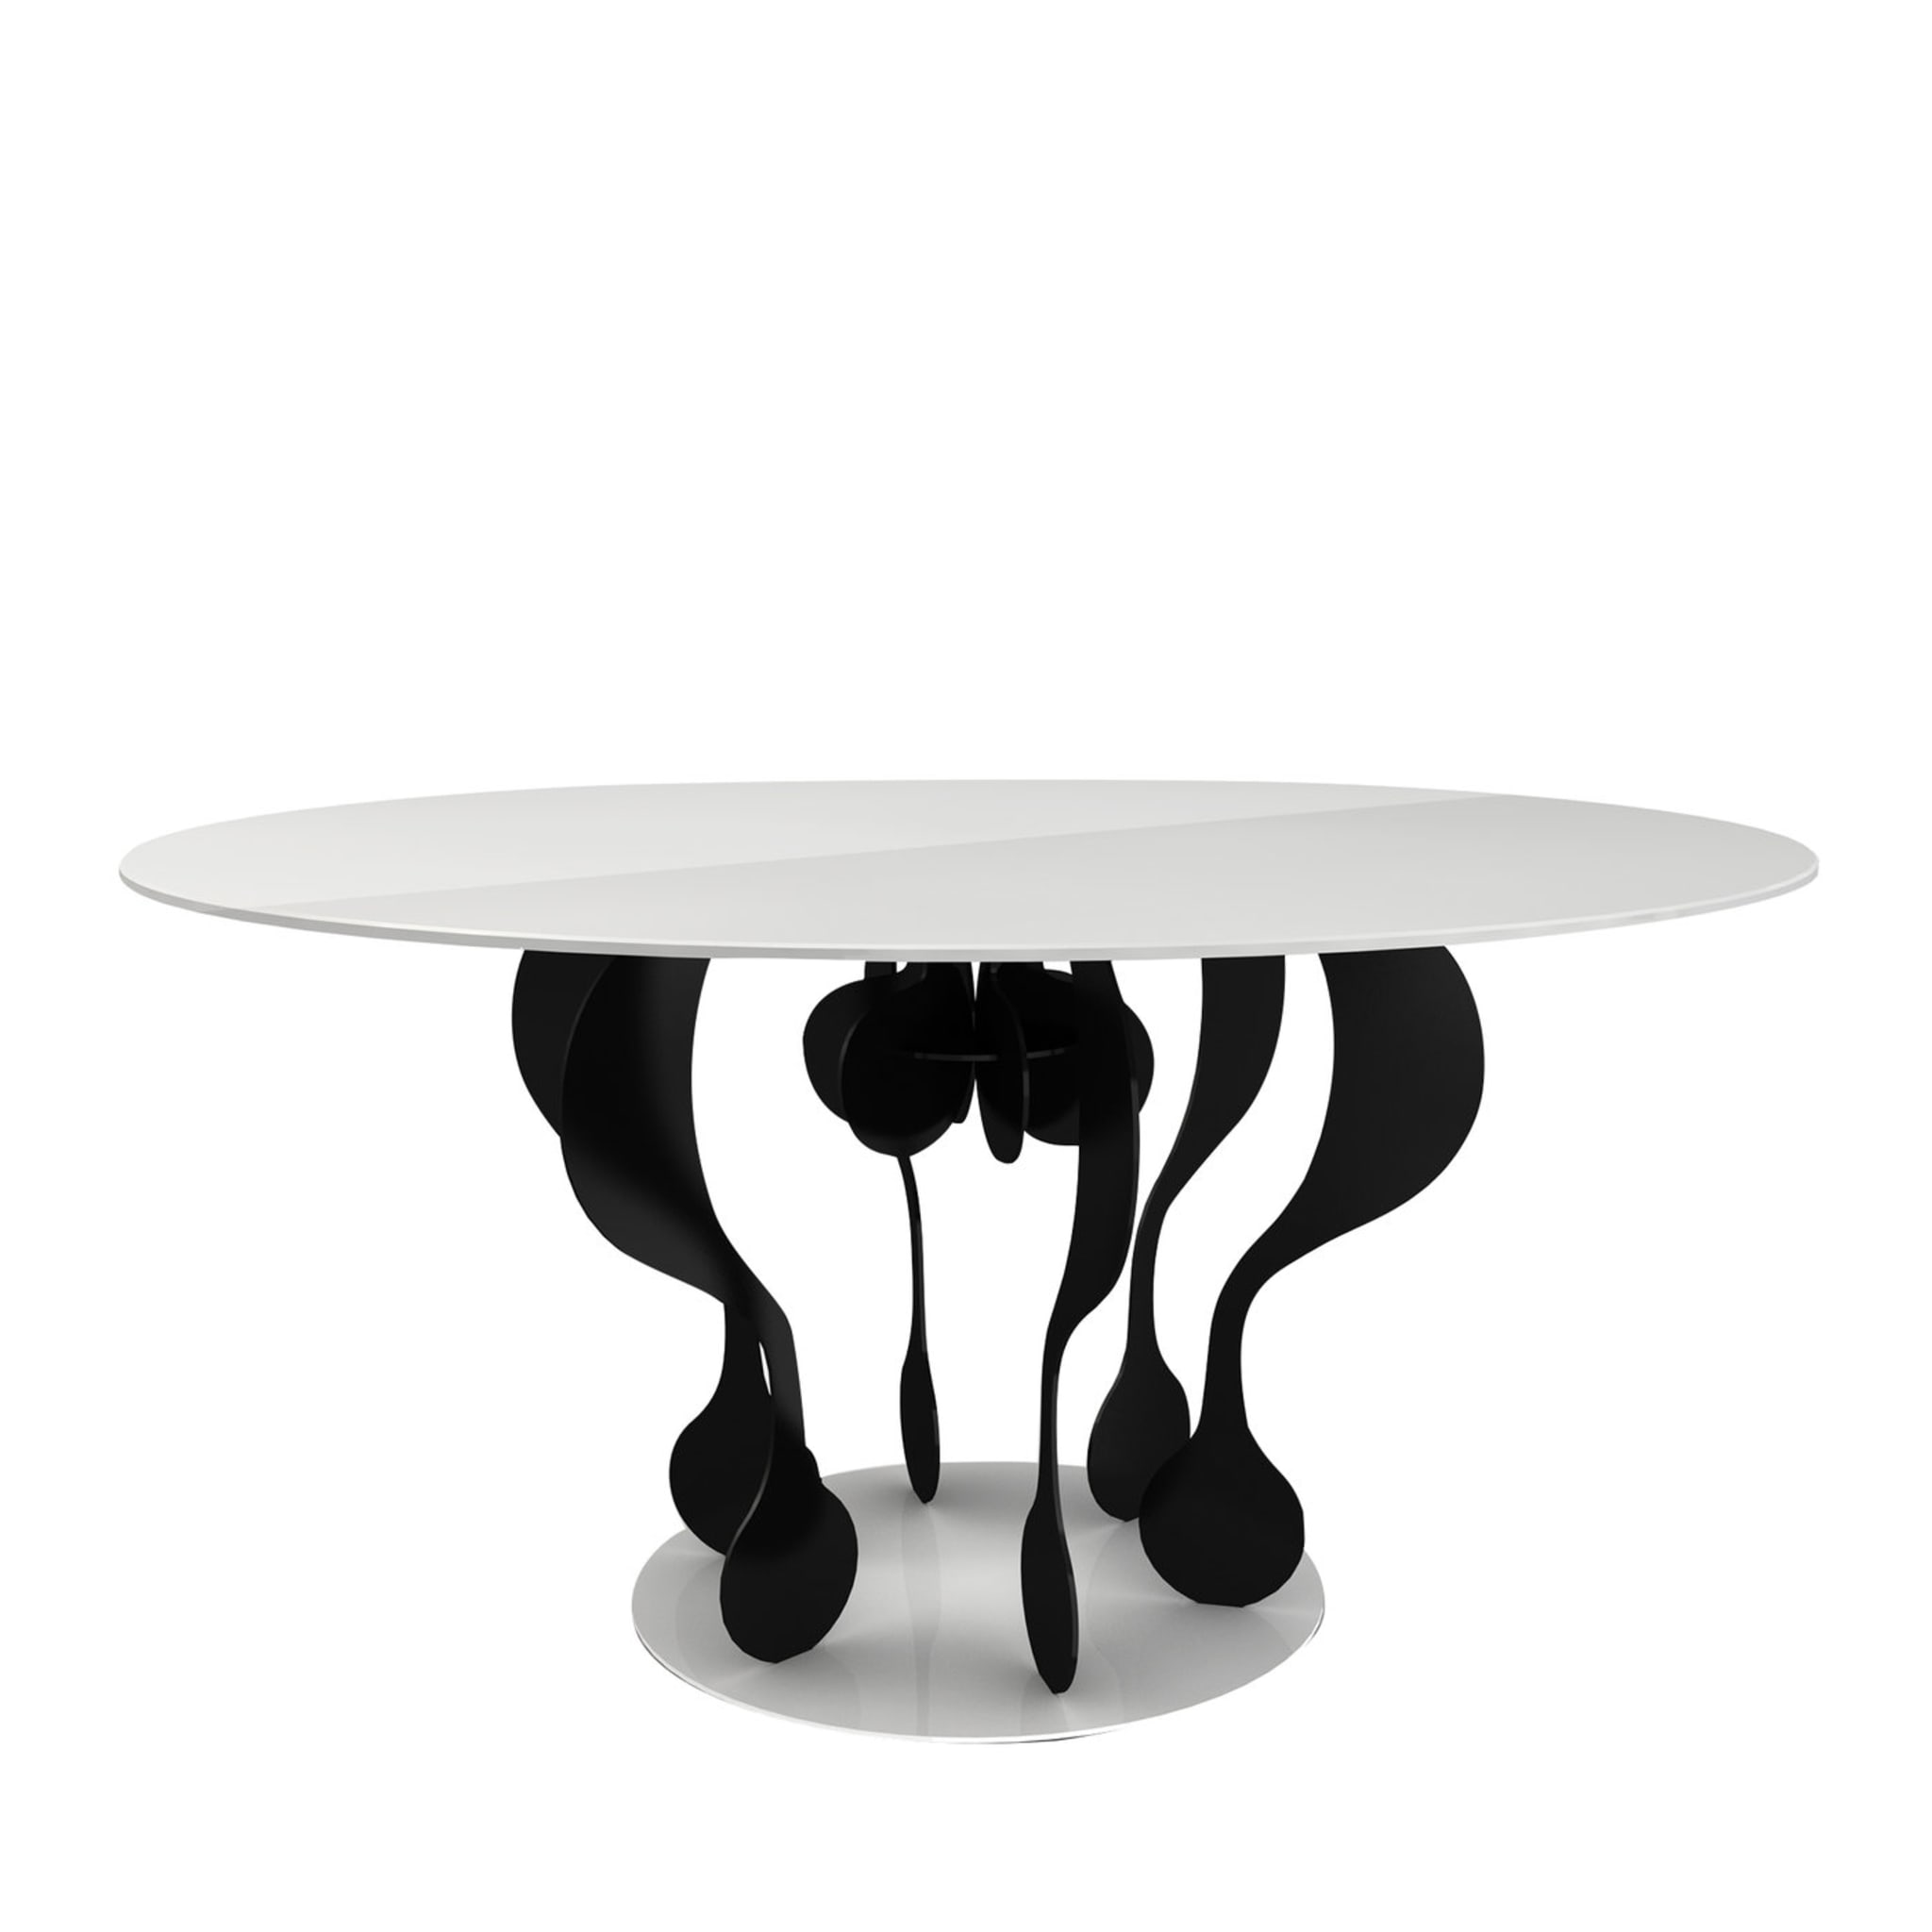 Enigma Black Table by Garilab by Piter Perbellini - Main view